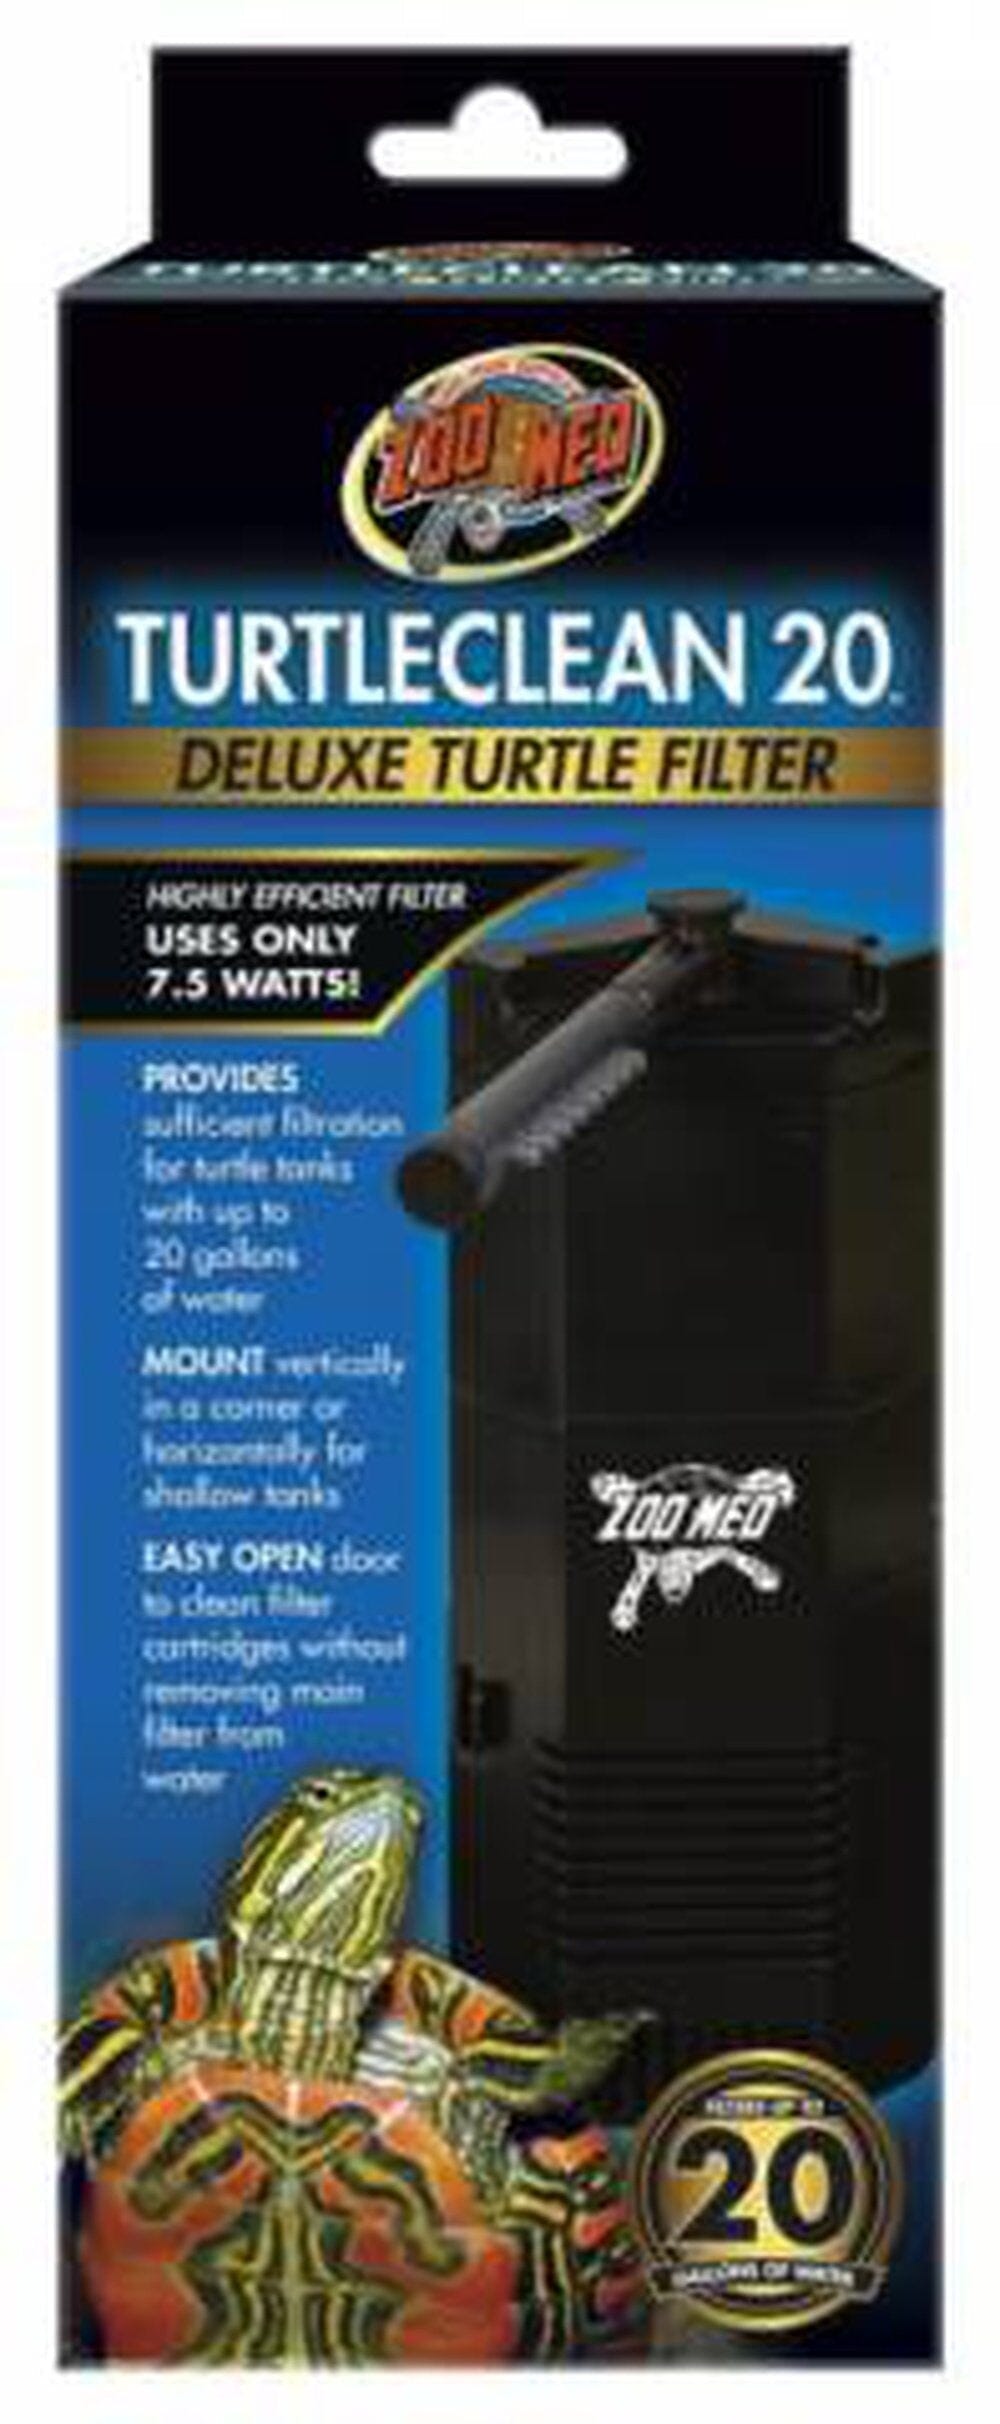 Zoo Med TurtleClean 20 Deluxe Turtle Filter fish supplies Zoo Med 